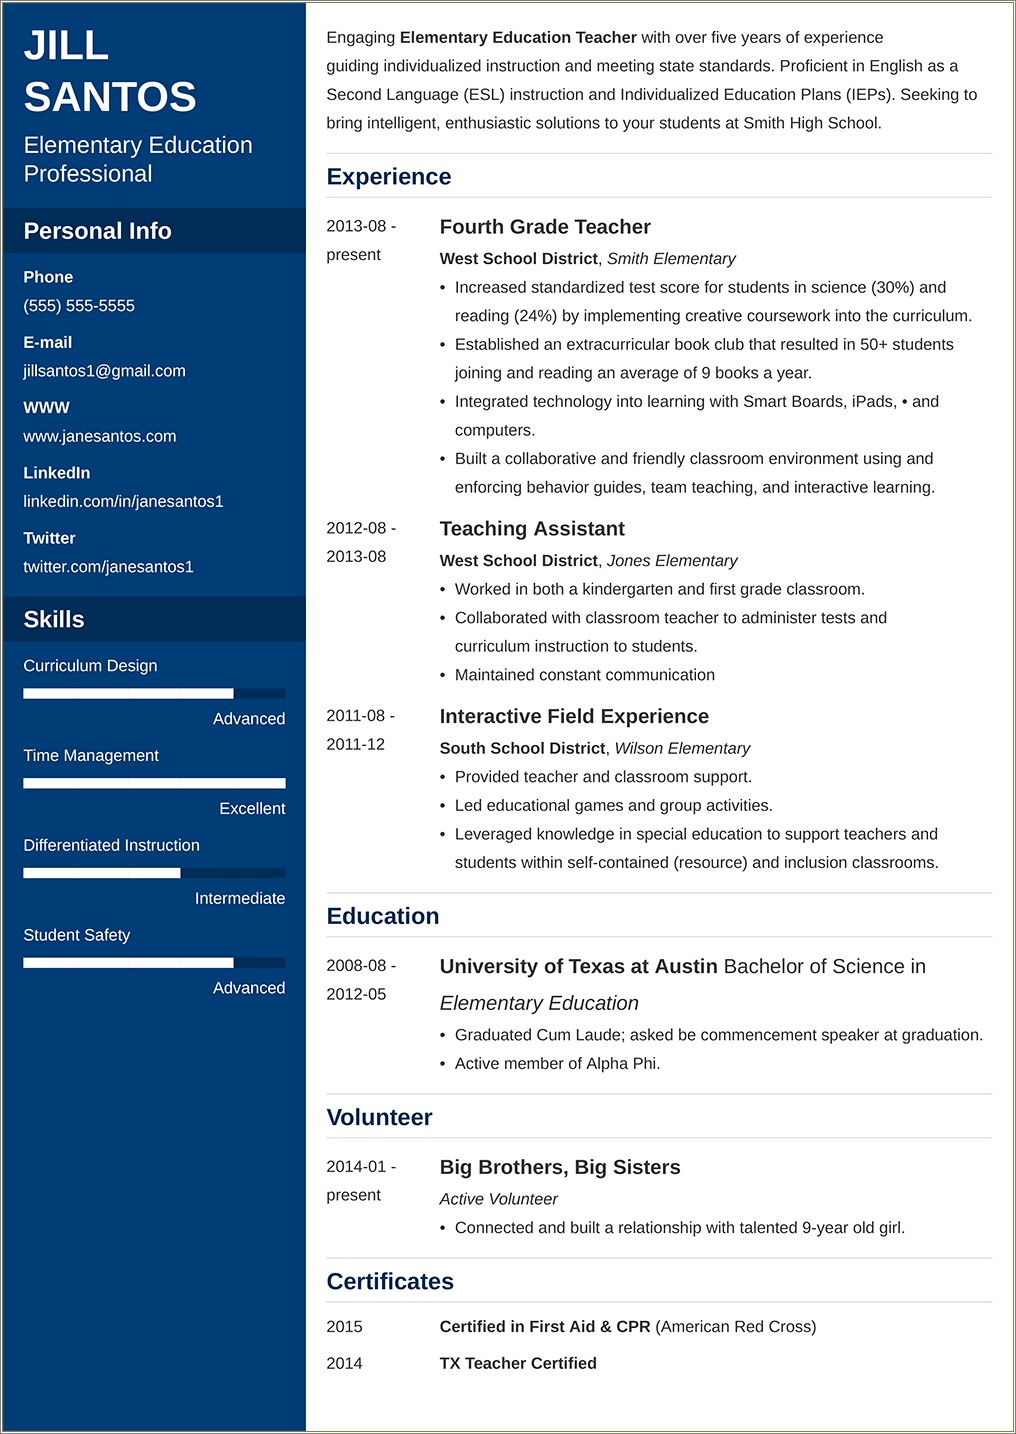 Examples Of A Good Professional Resume